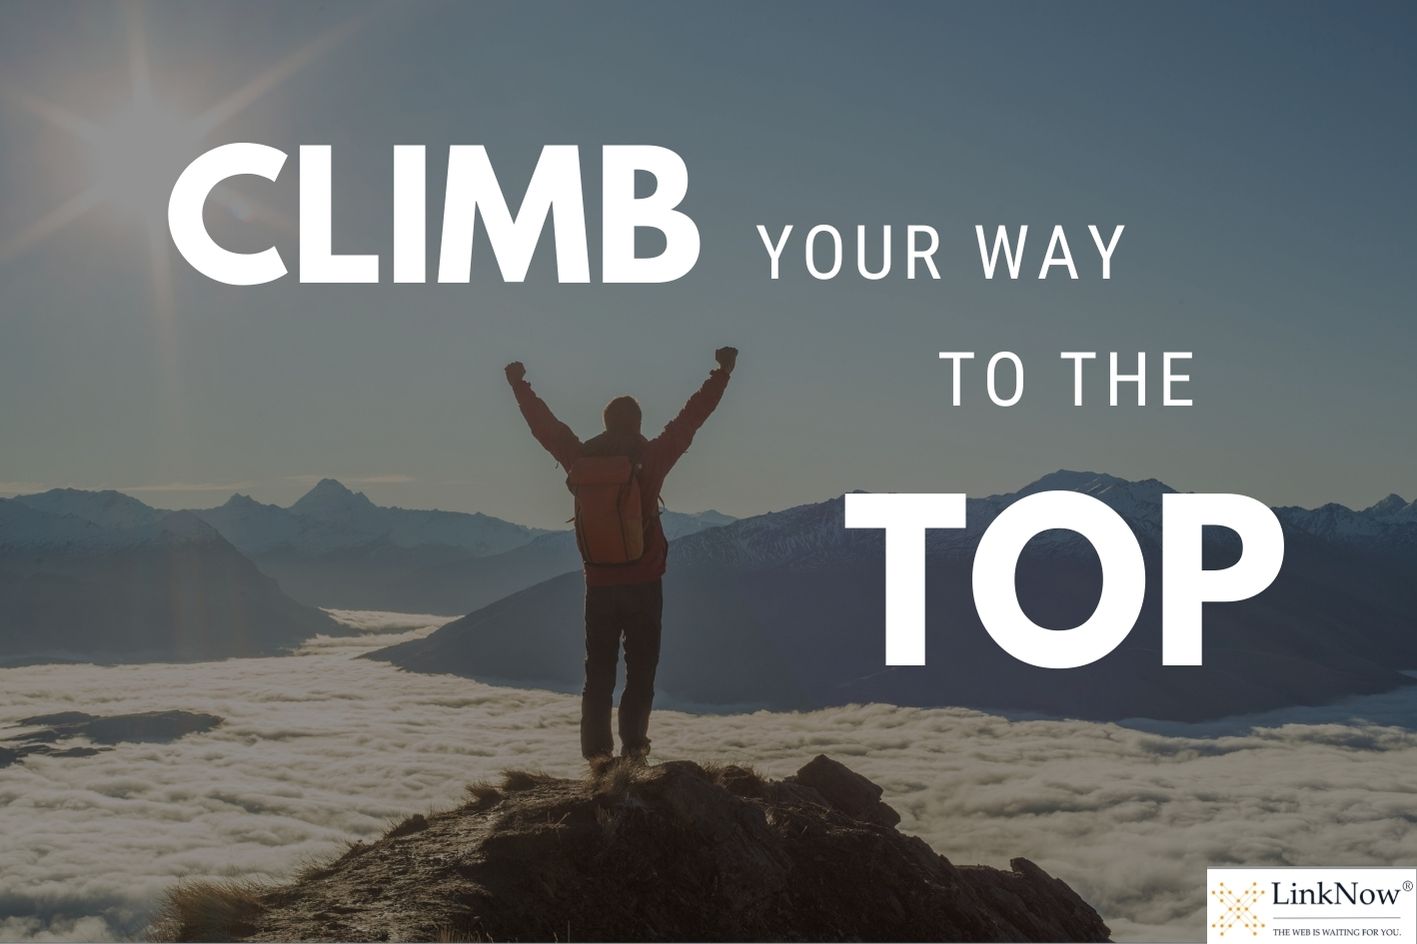 A person stands at the summit of a mountain with their arms raised in celebration. Text says: "Climb your way to the top."